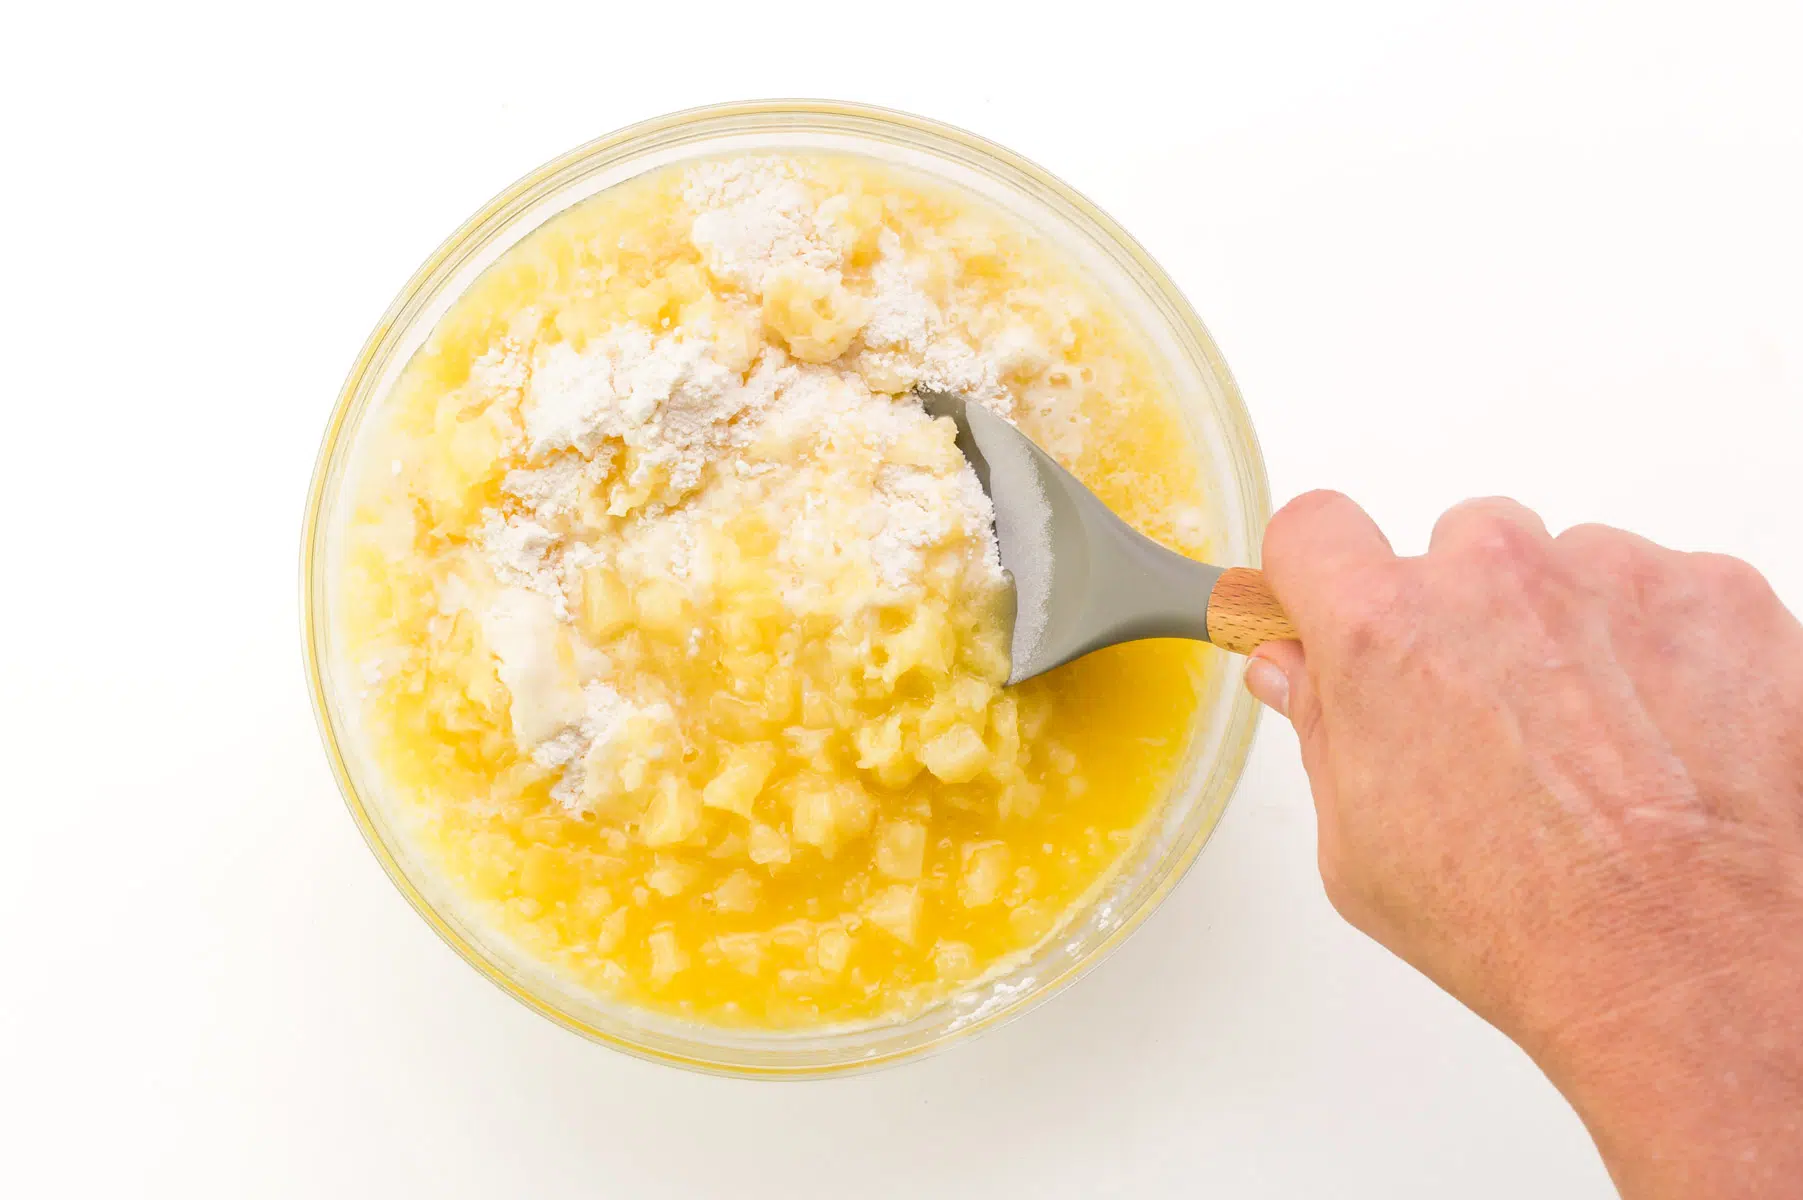 A hand holds a spatula, using it to stir together cake batter with crushed pineapple.